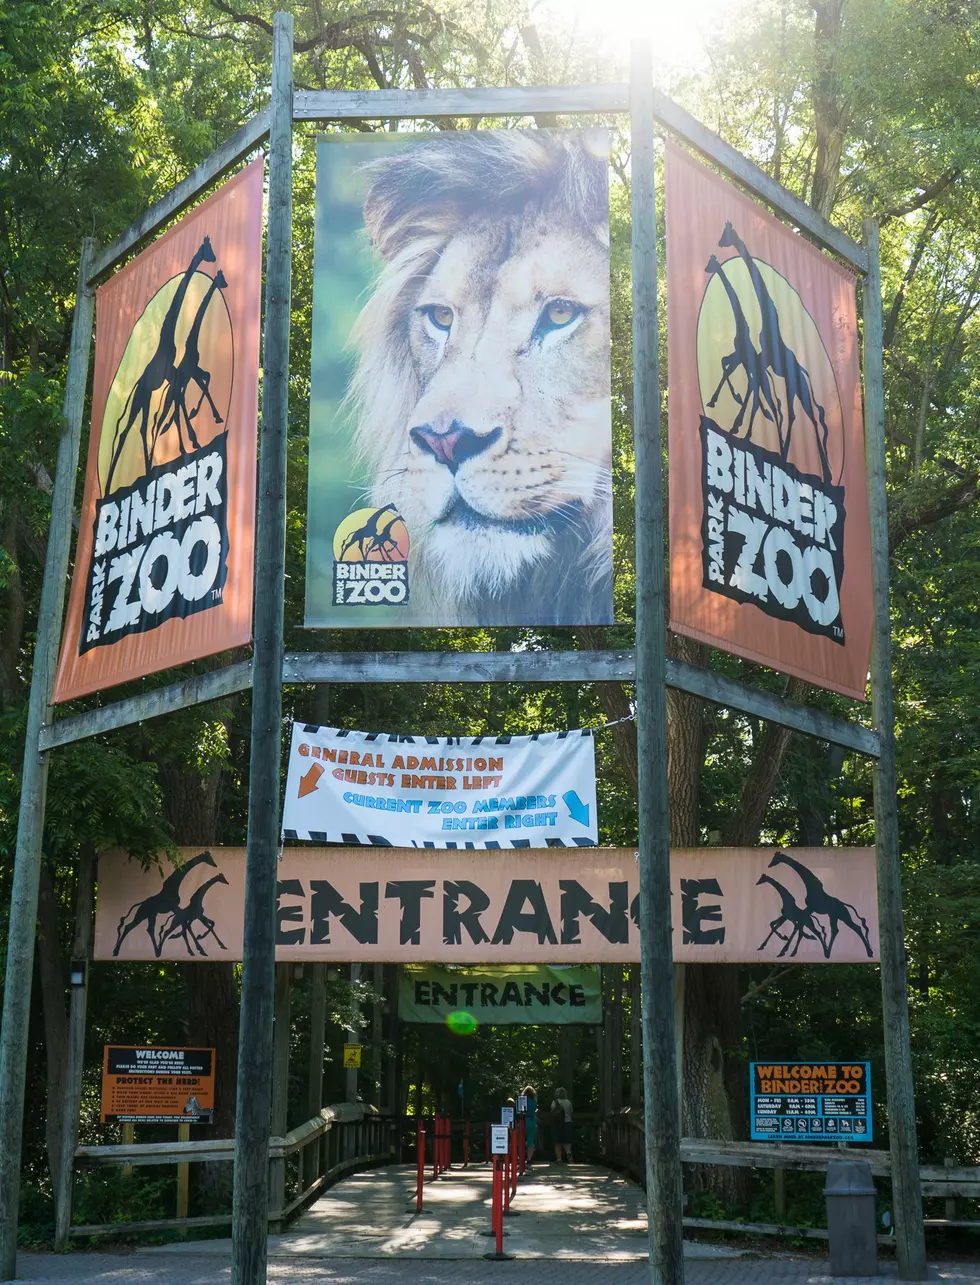 Binder Park Zoo Partnership To Help Guests With Sensory Issues